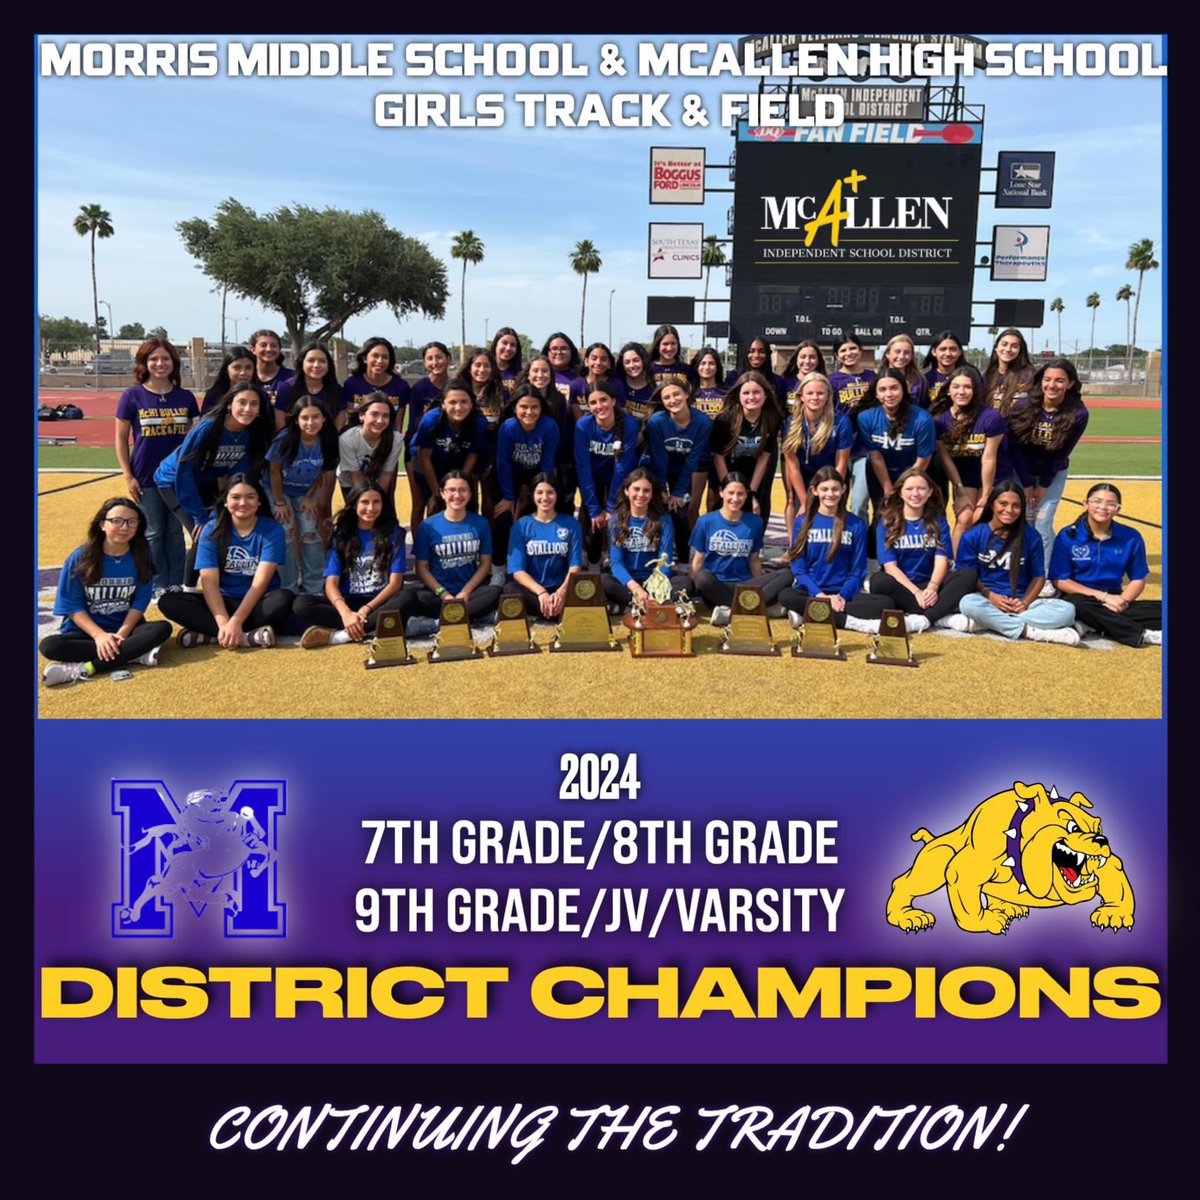 CONGRATULATIONS FOR A CLEAN SWEEP OF THE DISTRICT CHAMPIONSHIPS for our Morris Lady Stallions & McHi Lady Bulldogs Track Teams!!!! Go Stallions! Go Bulldogs! 💙🤍💜💛 #morrispride #misd #districtofchampions